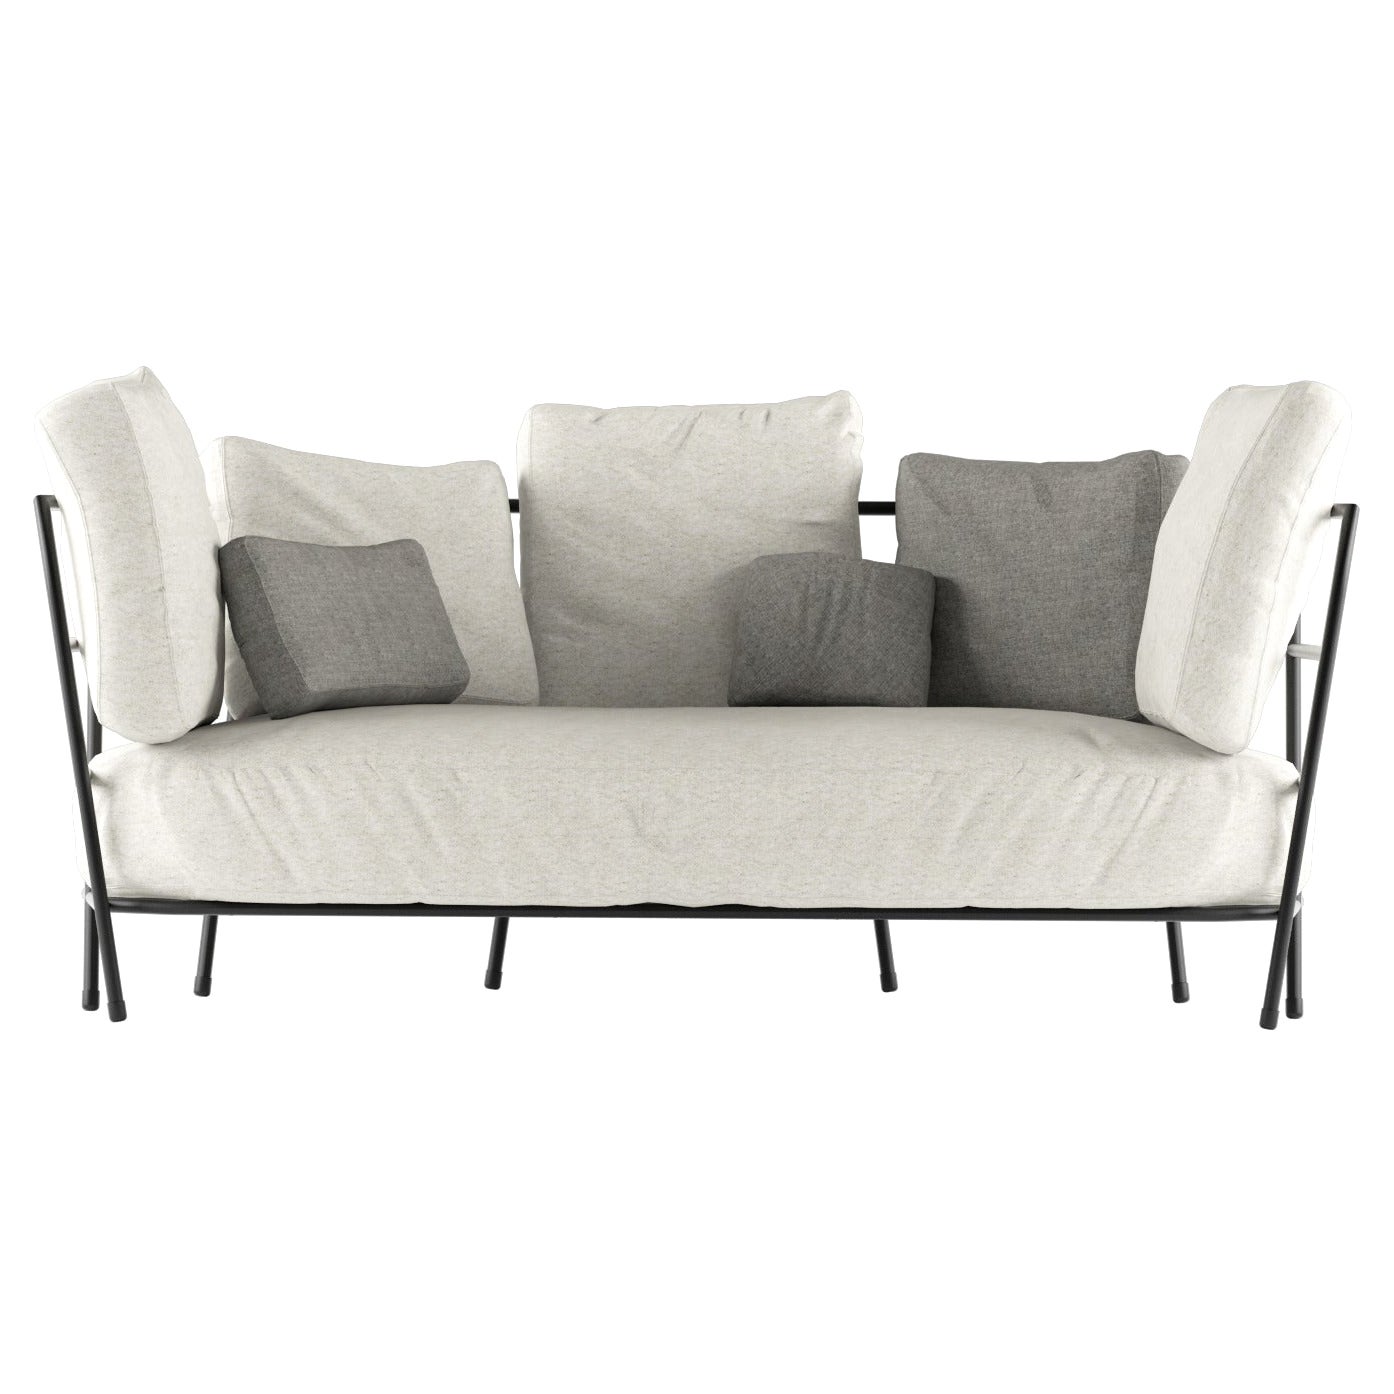 Alias 372_O Dehors 3 Seater Sofa in Light Grey Seat with Black Lacquered Frame For Sale